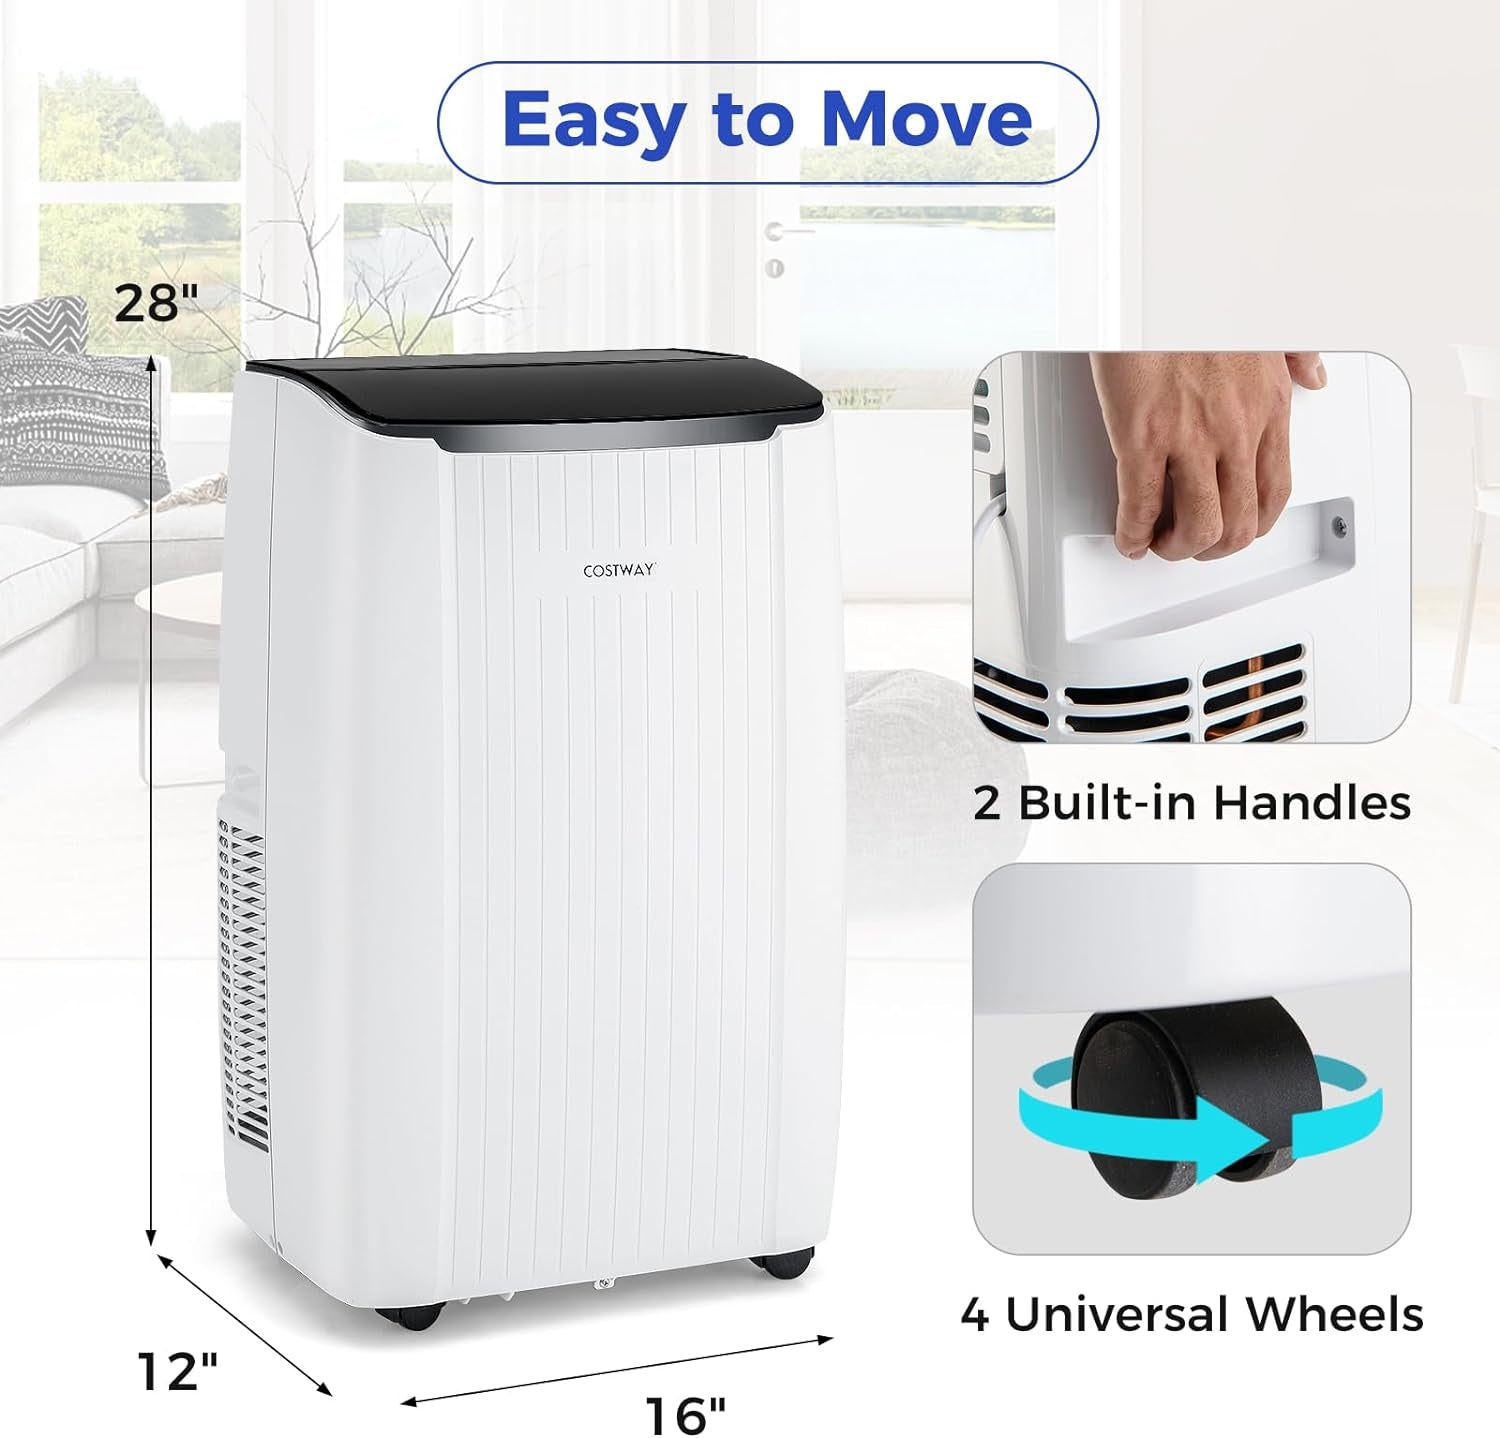 14000BTU Portable Air Conditioner with Heat, Smart Wifi Enabled AC Unit, Fan & Dehumidifier W/ 24H Timer, Sleep Mode, Remote Control & Installation Kit, Cool Rooms up to 700 Sq.Ft